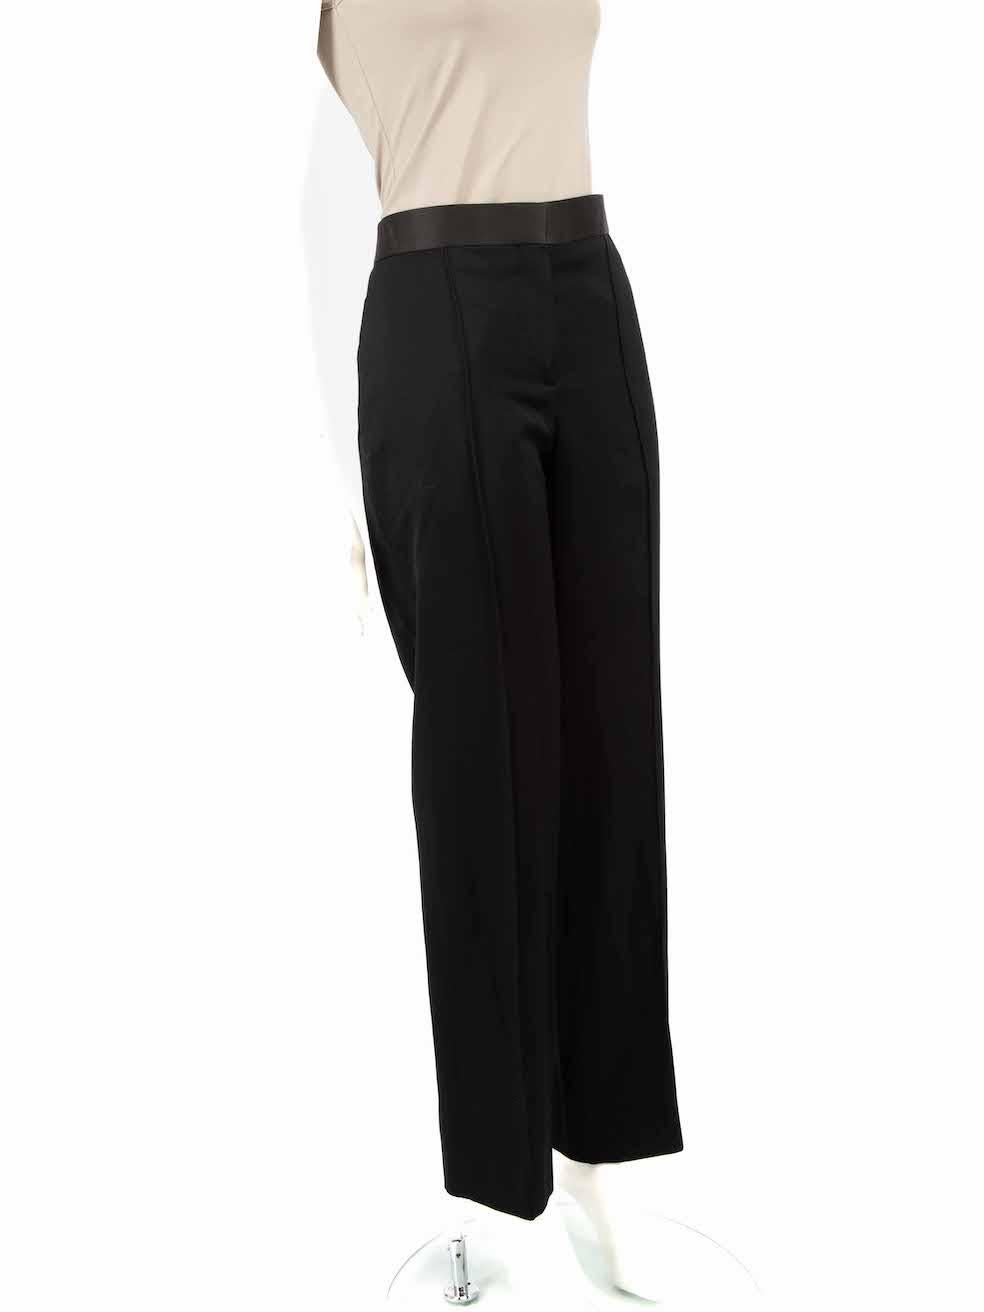 CONDITION is Very good. Minimal wear to trousers is evident. Minimal wear to external waistband with small plucks to the weave and minor marks on the internal waistband on this used Céline designer resale item.
 
 
 
 Details
 
 
 Black
 
 Wool
 
